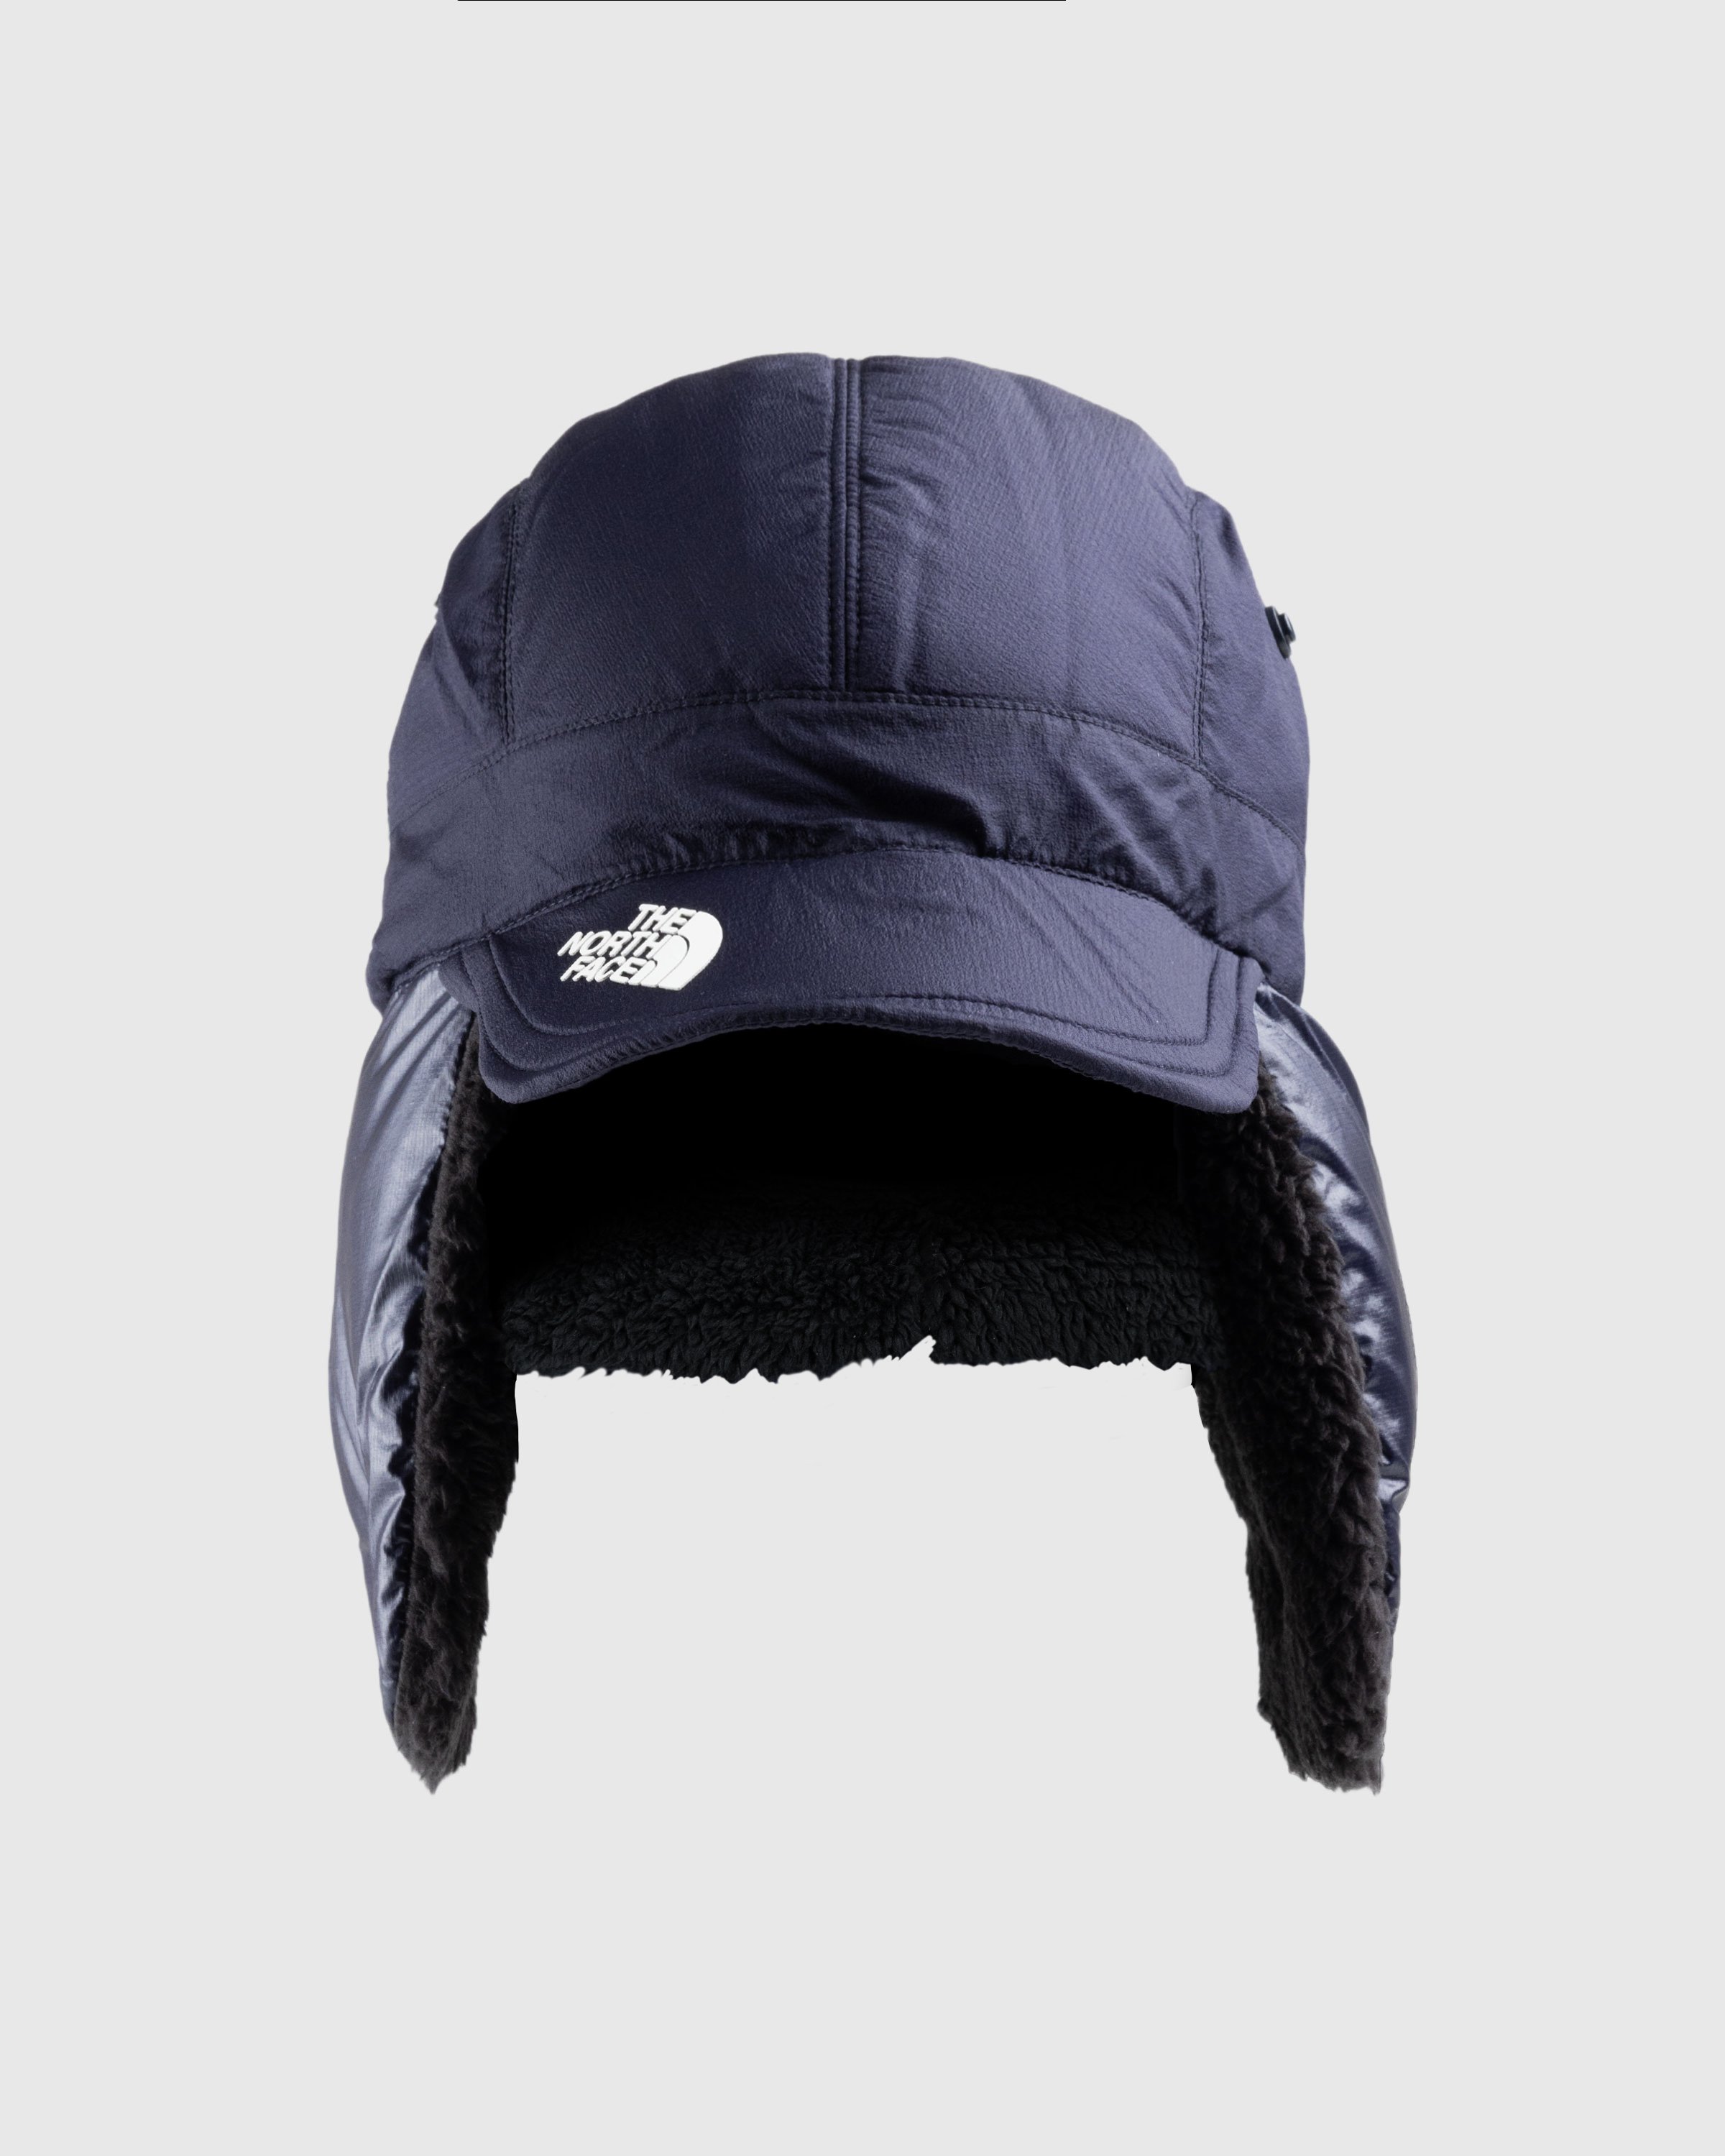 The North Face x UNDERCOVER - Soukuu Down Cap Black/Navy - Accessories - Multi - Image 1